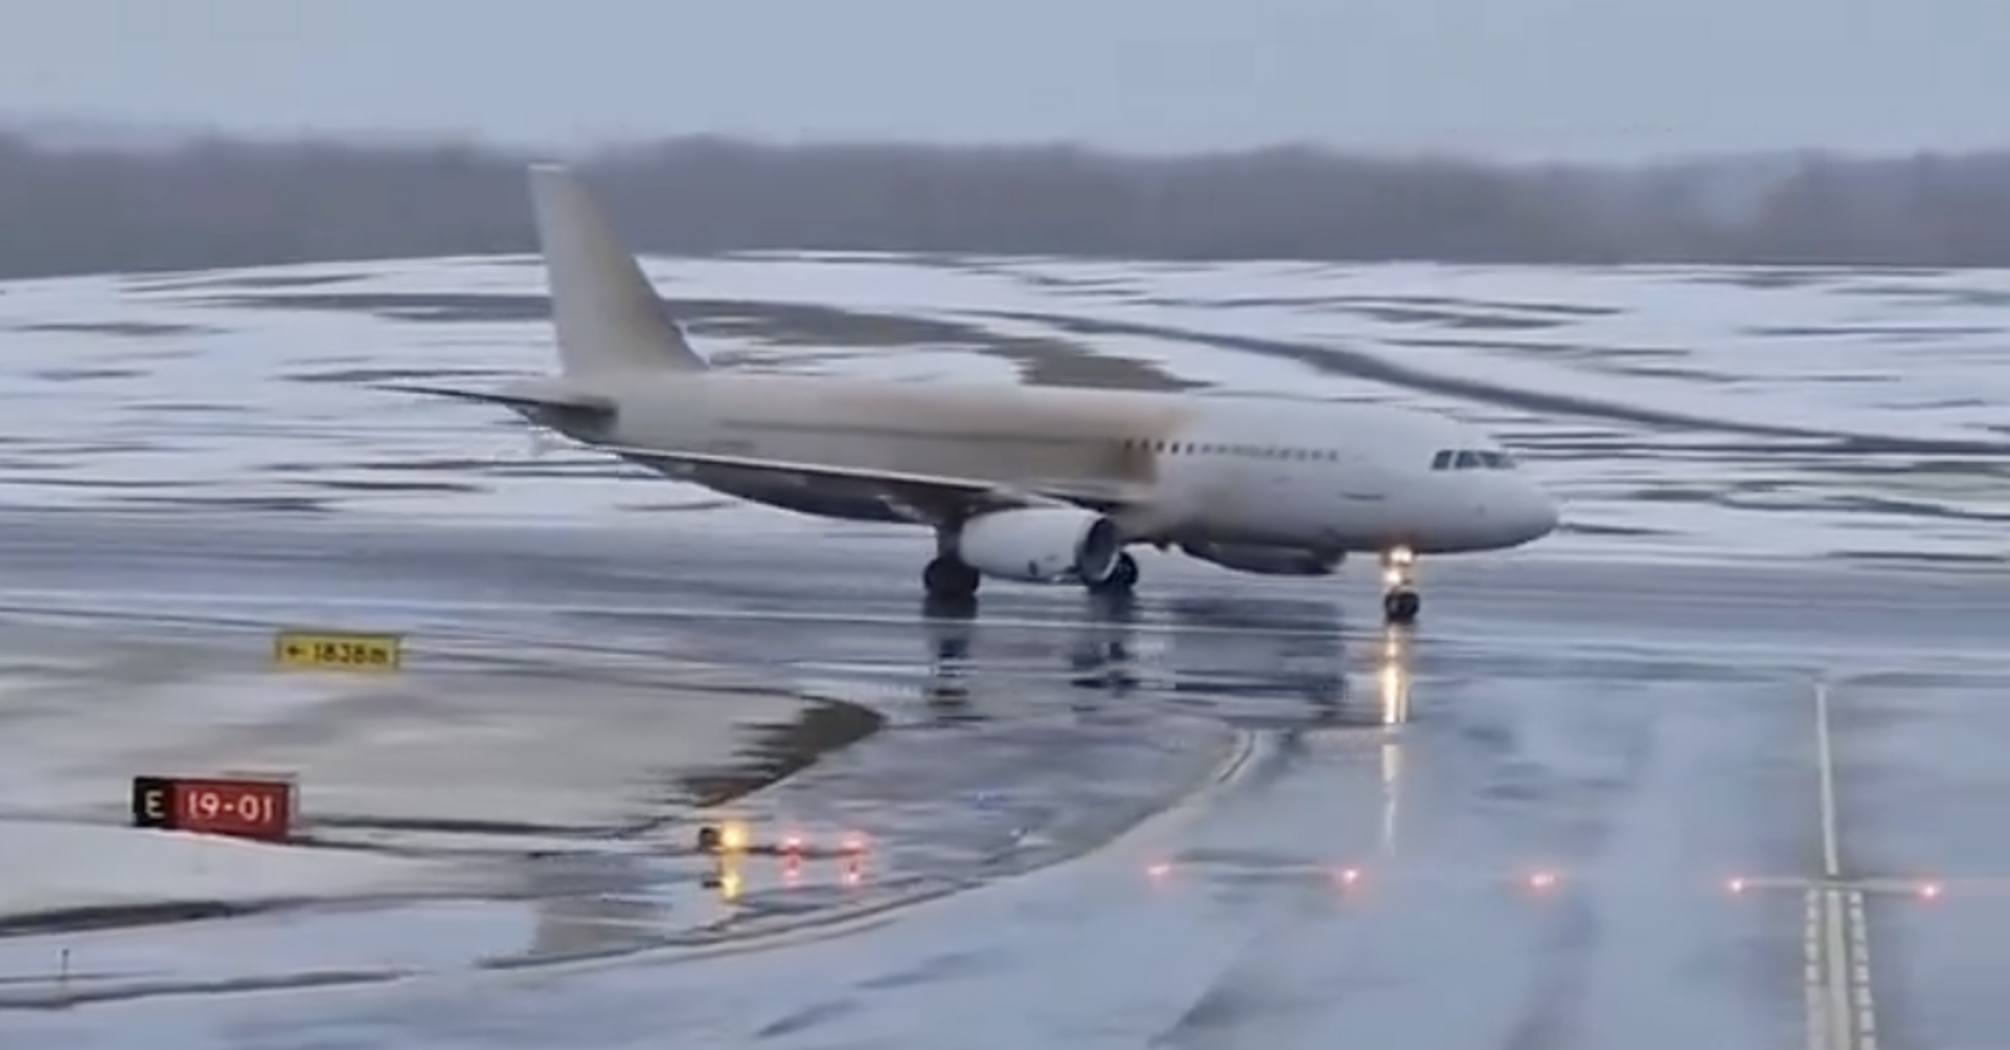 A passenger plane operated by Avion Express with 185 people on board skidded off the runway and rolled through a swamp